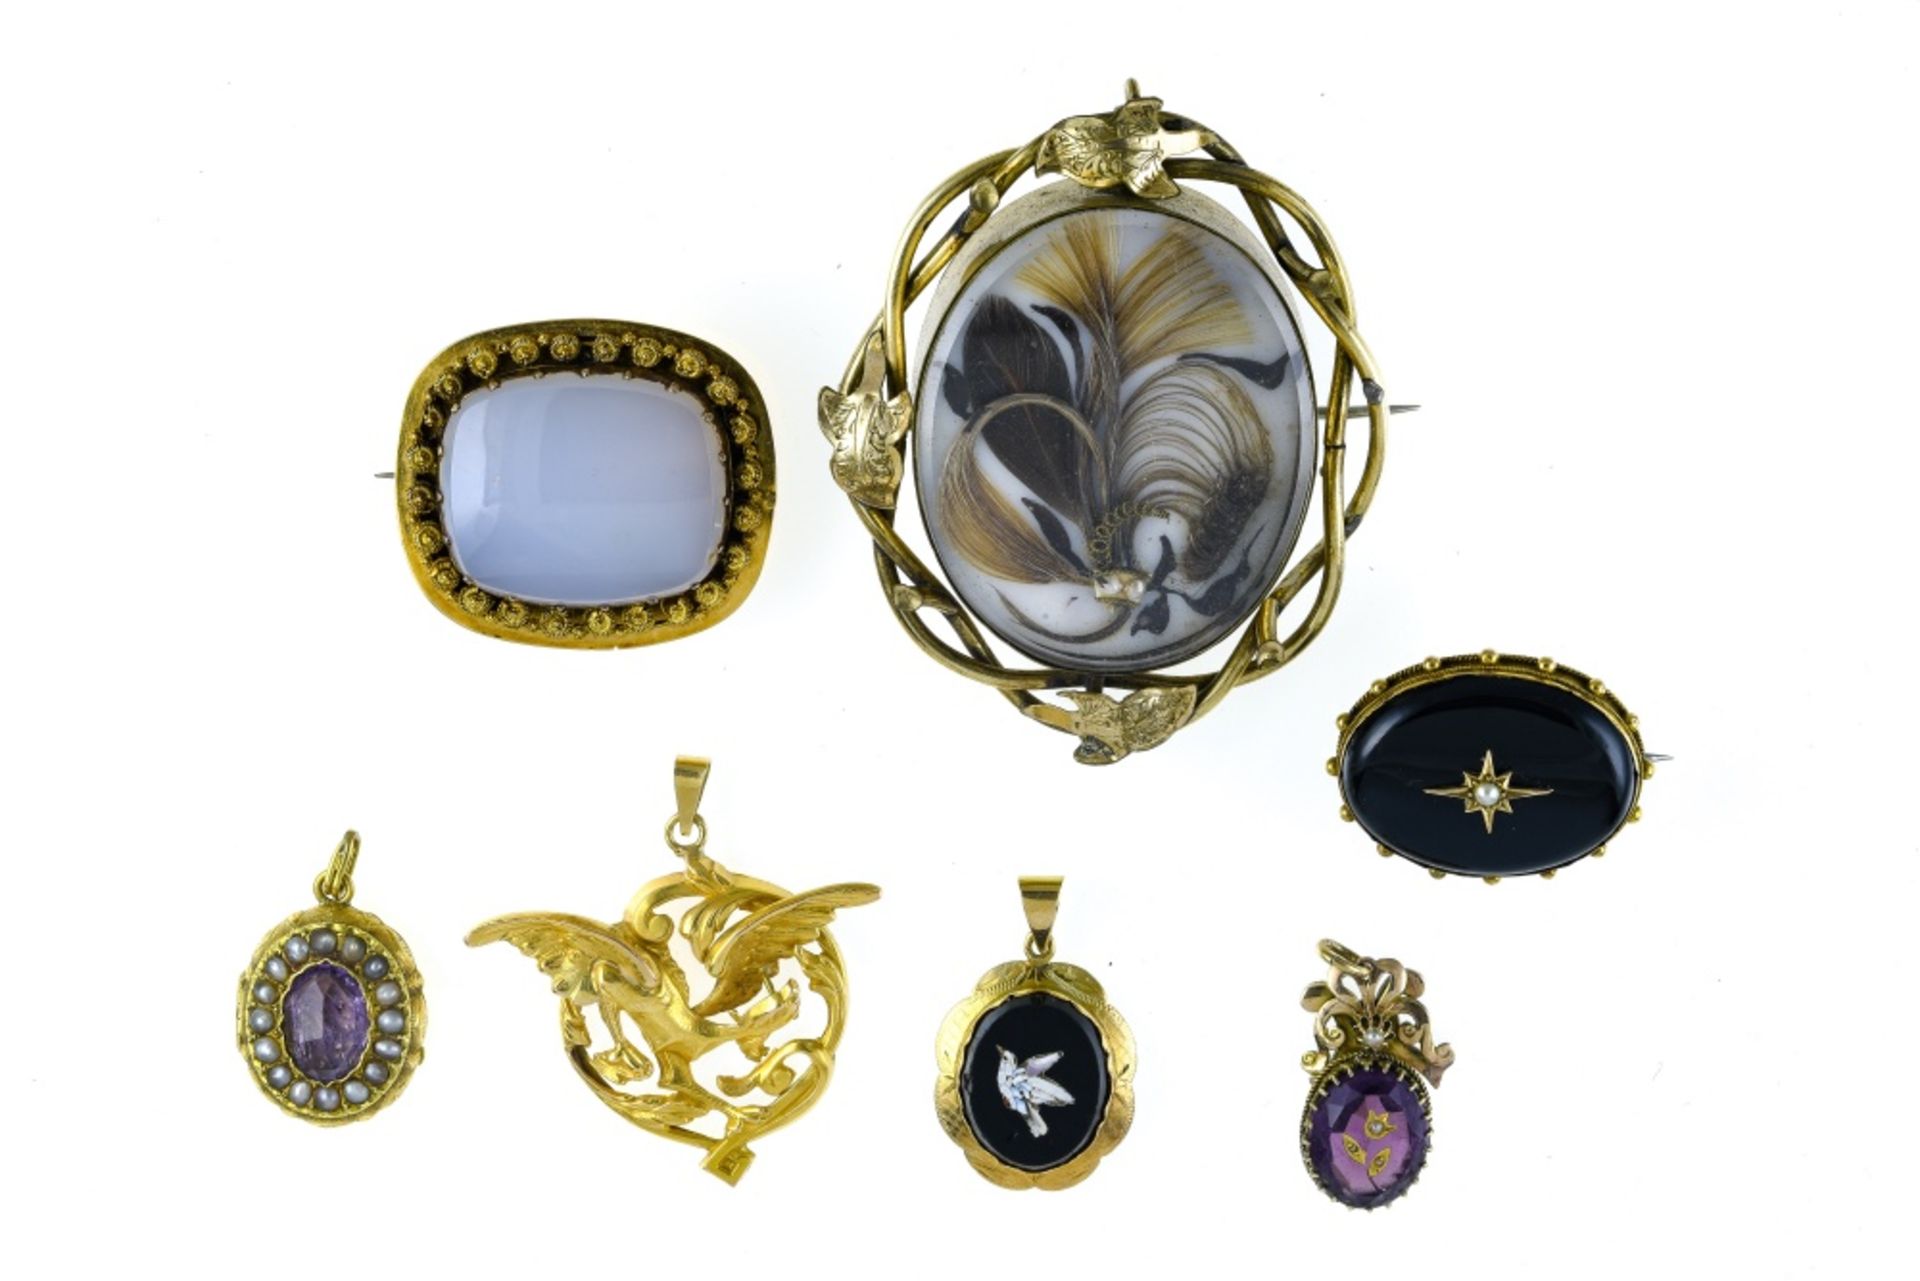 Lot of four pendants and 3 brooches, late 19th century 18 kt gold, pomponne brass.